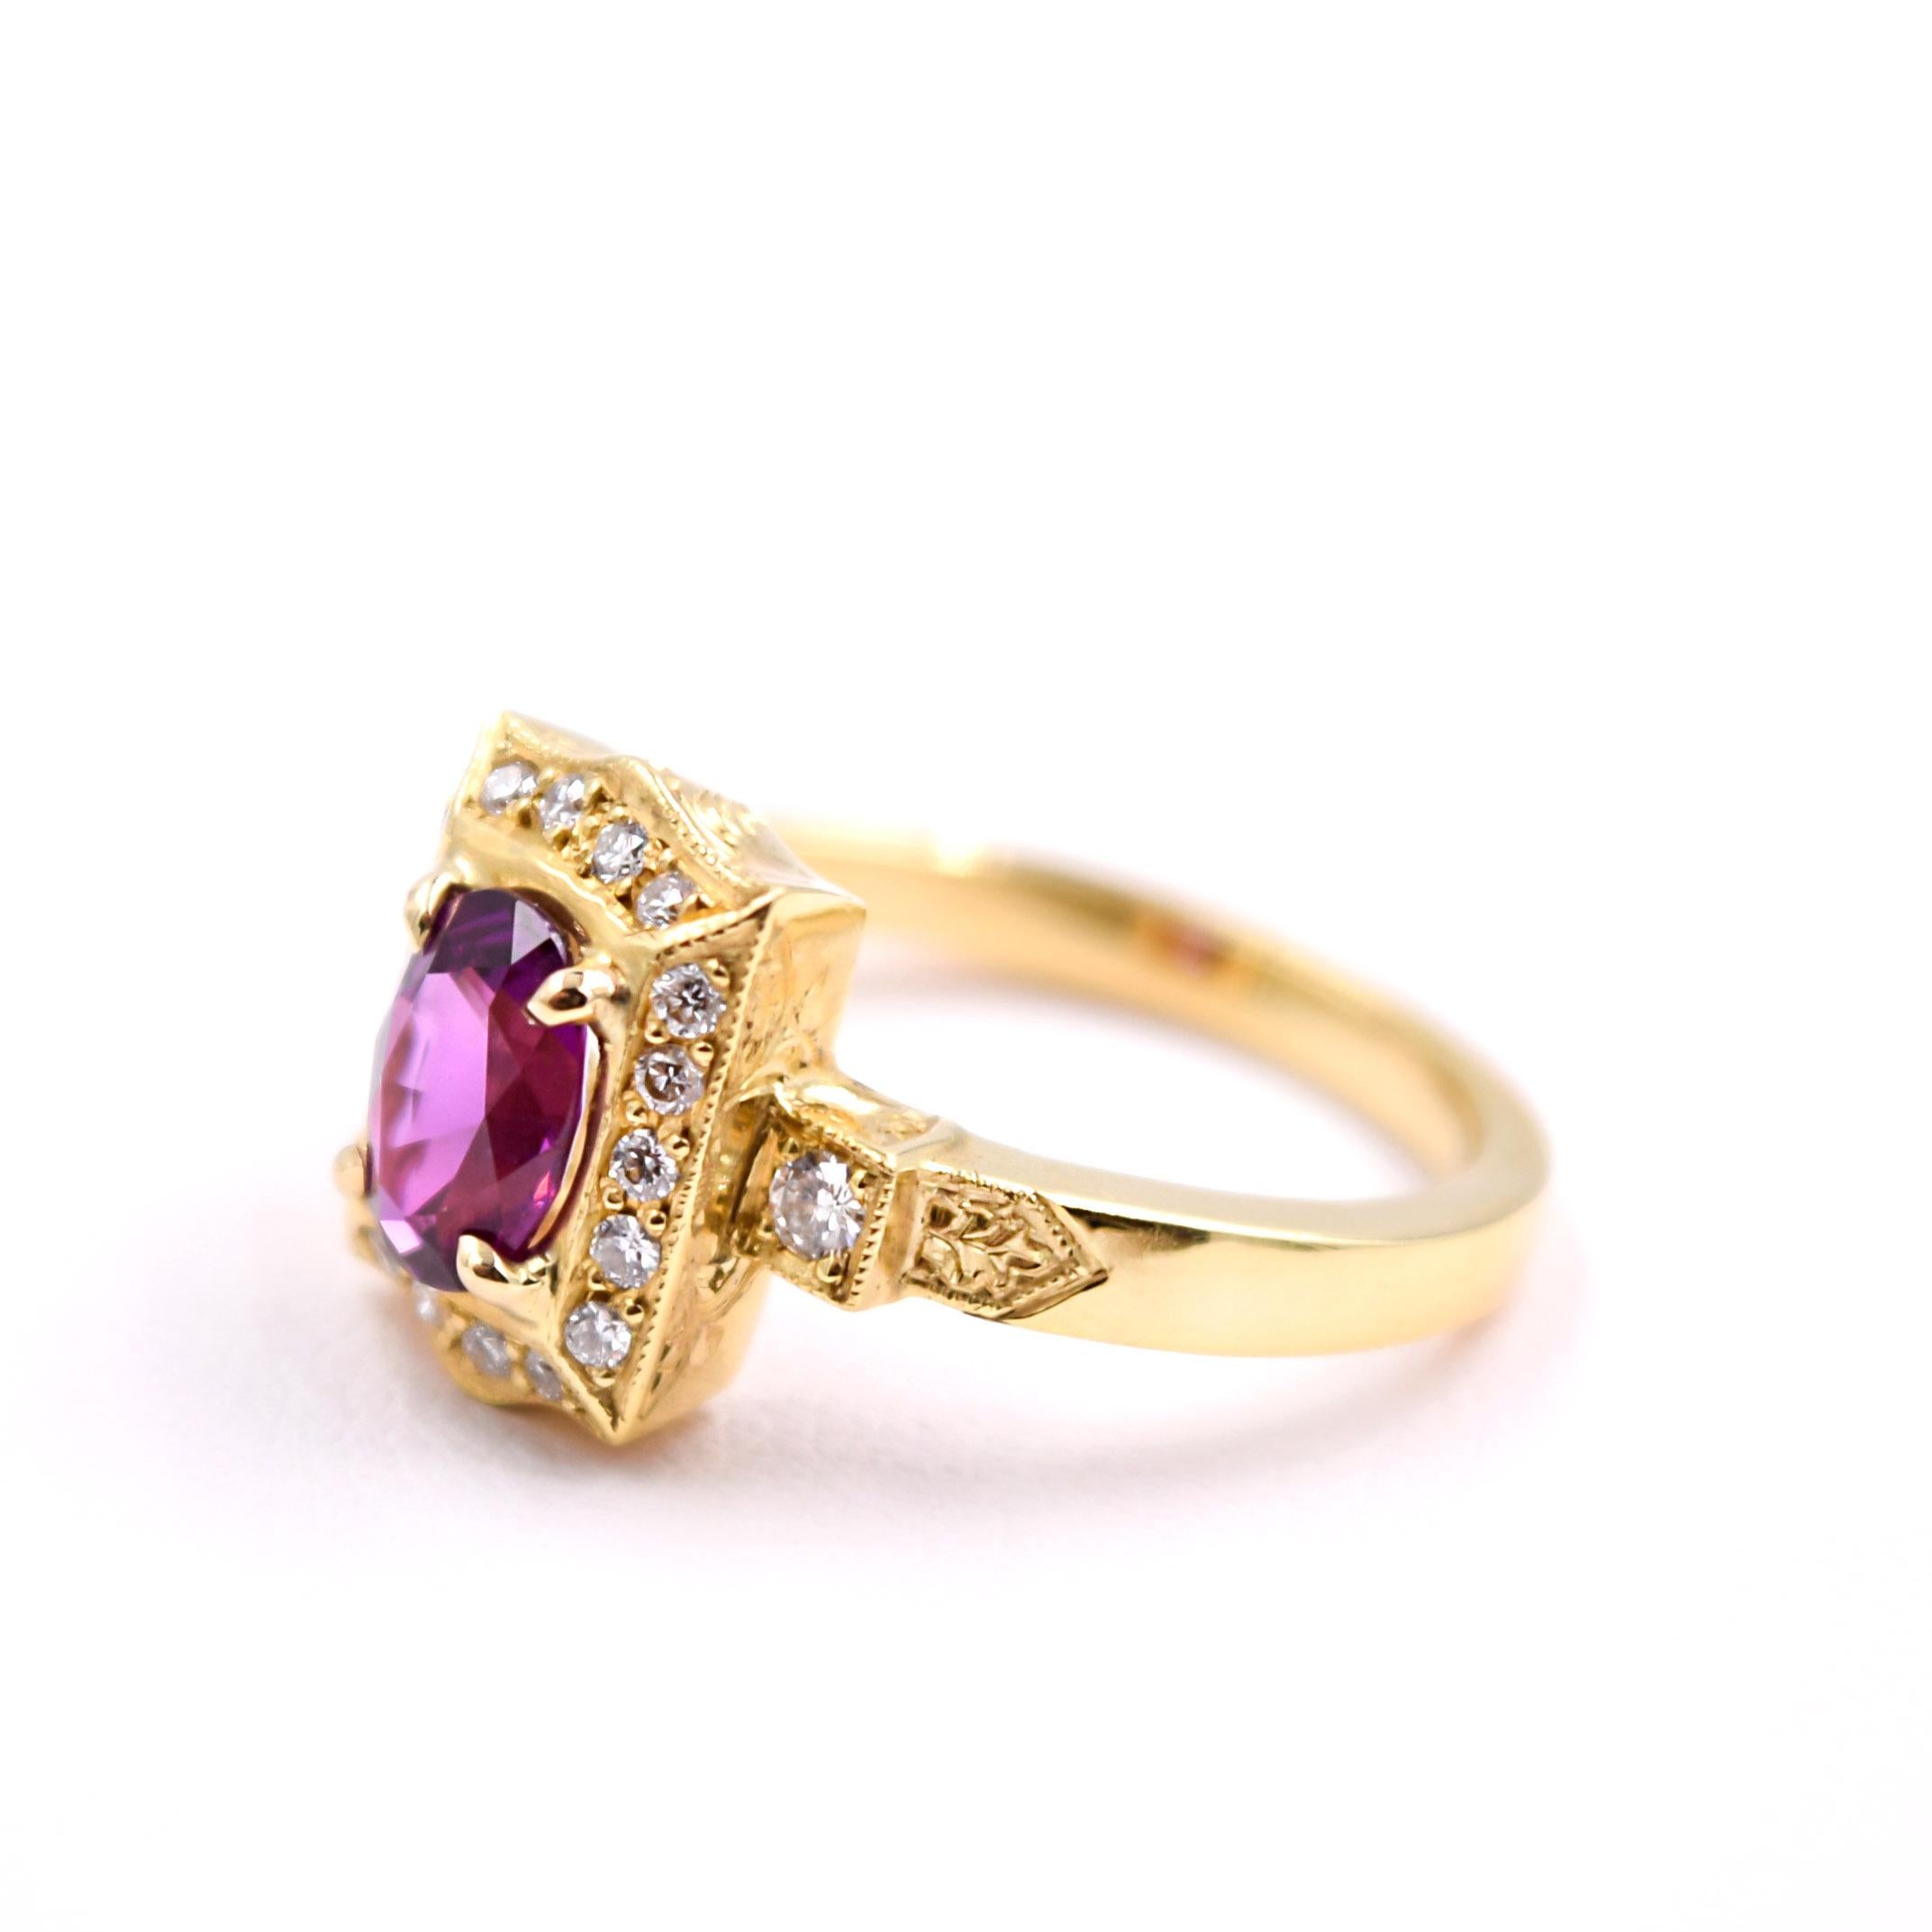 Romantic Carl Priolo 1.10 Carat Oval Pink Sapphire and Diamond Statement Ring in 18K Gold For Sale